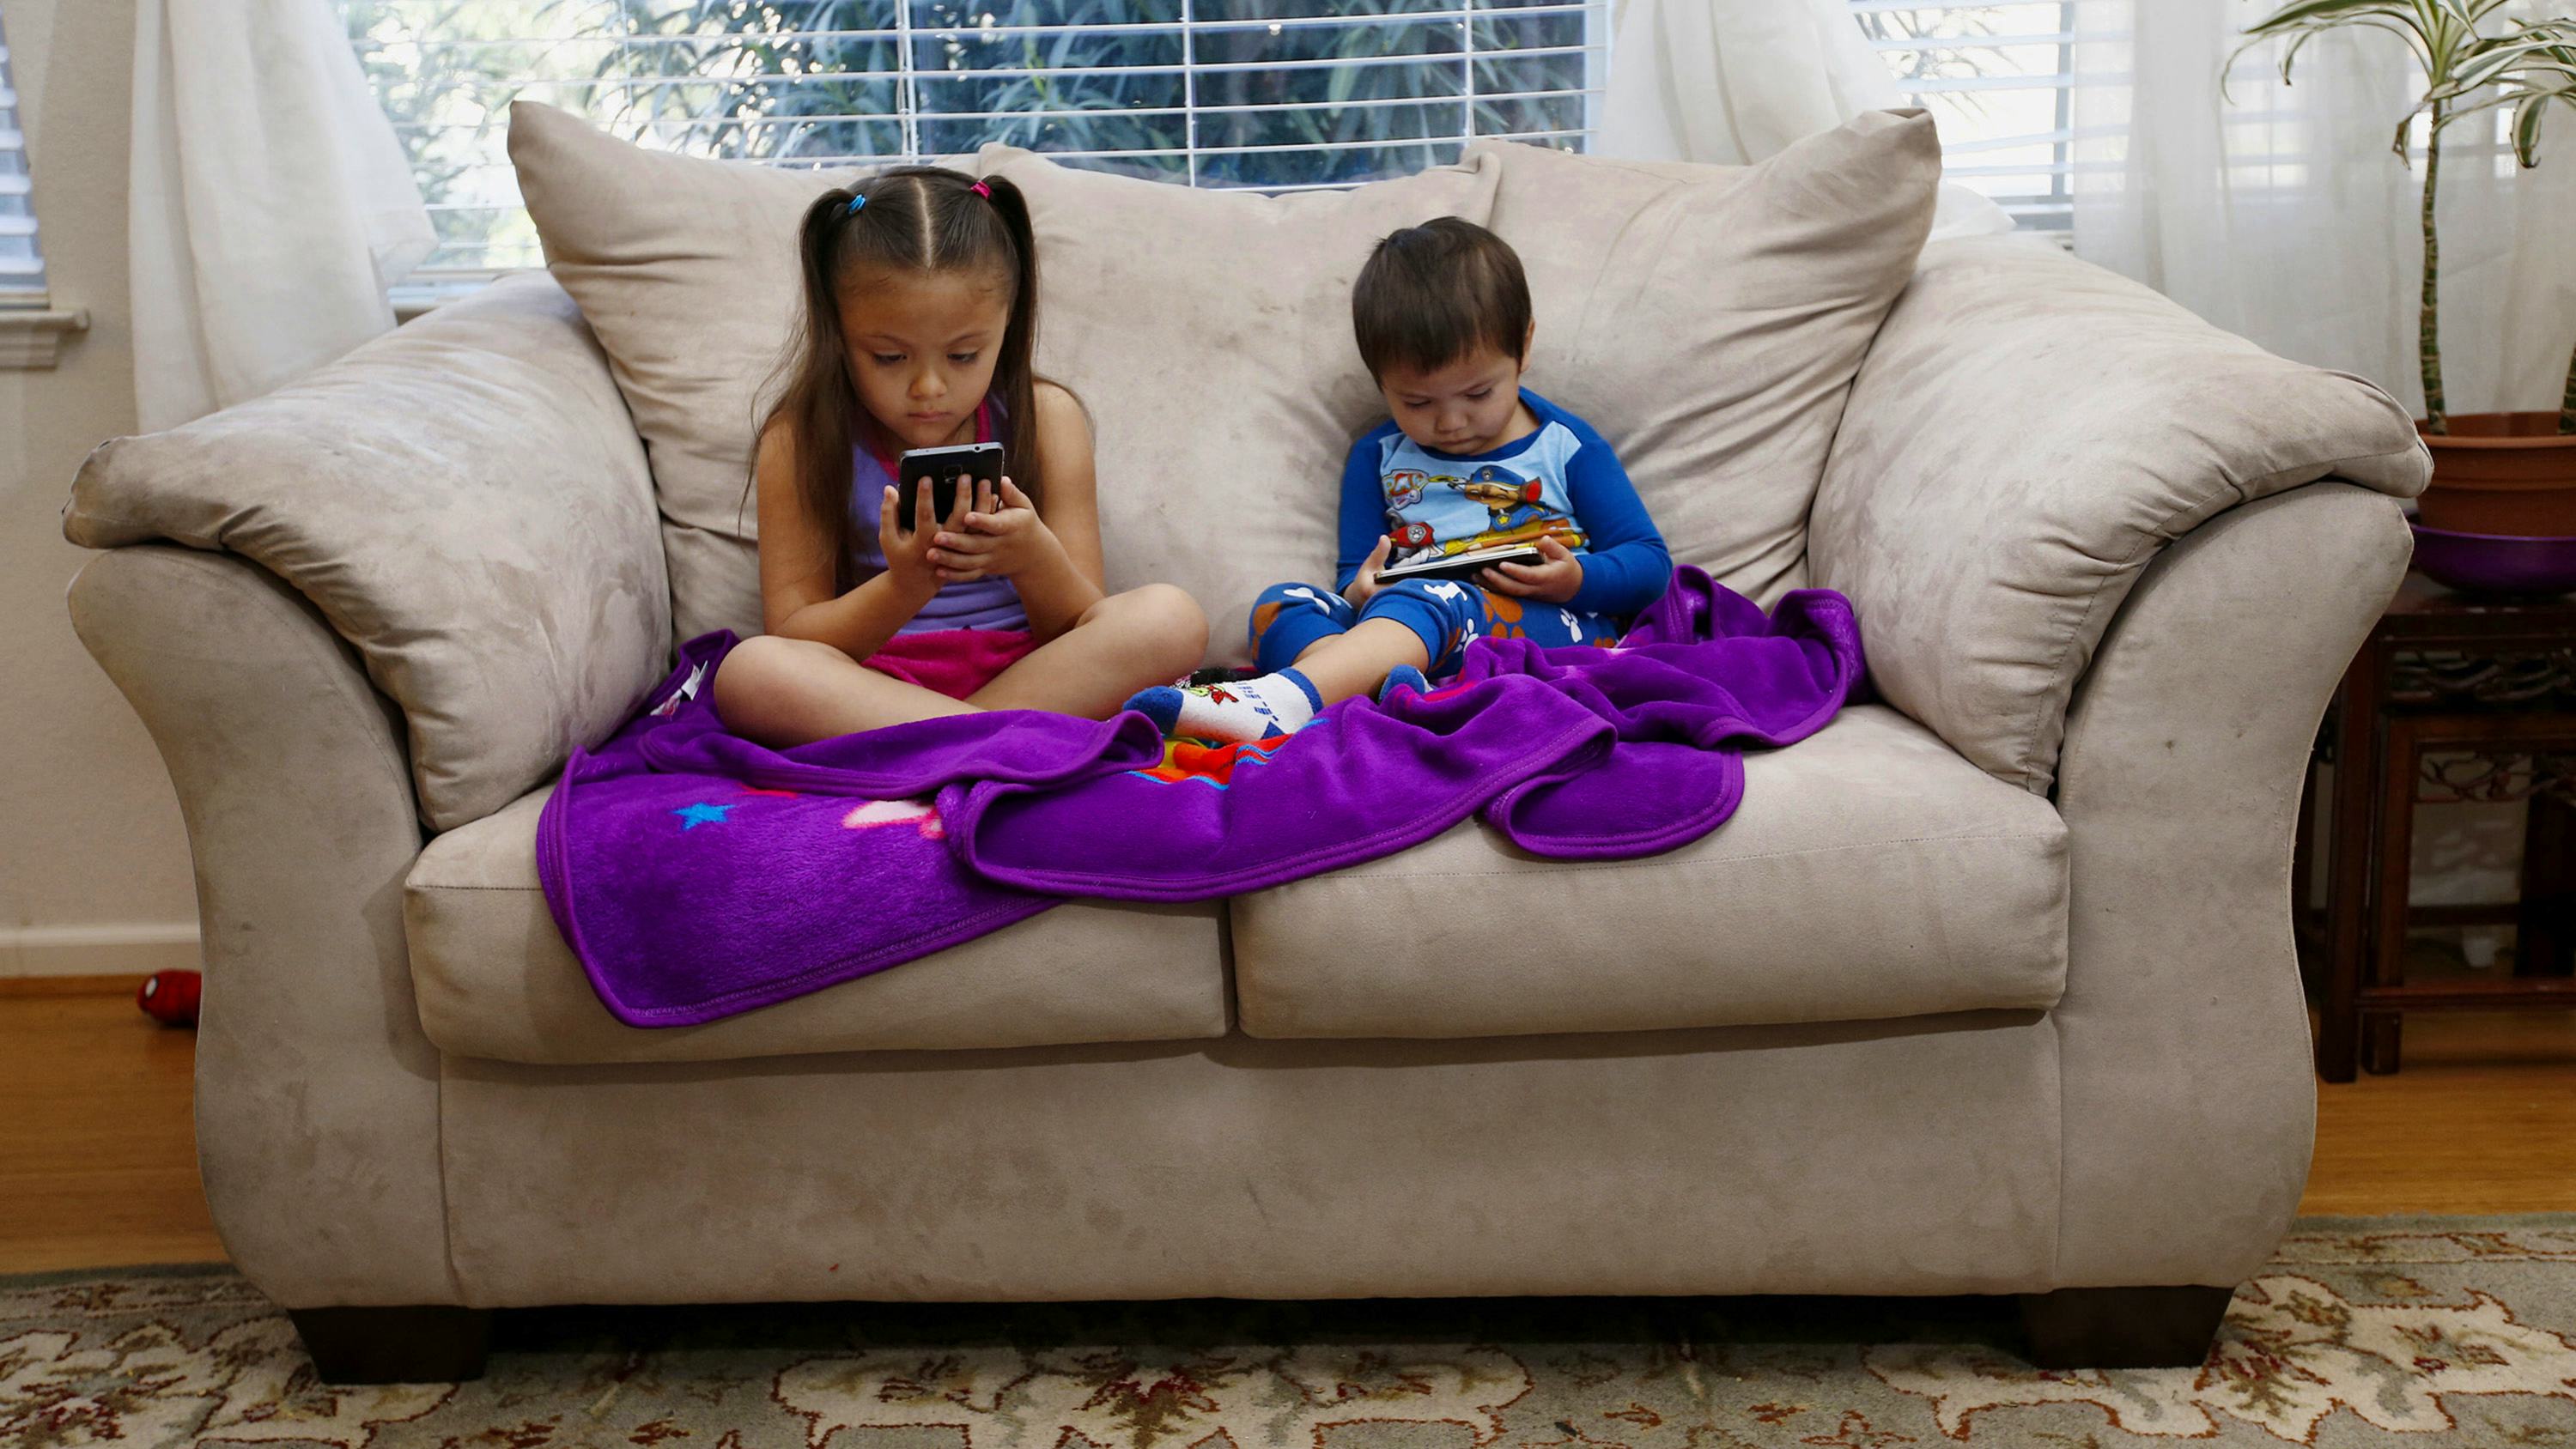 Newsela - What big-screen TV? Kids are more entertained by their smartphones